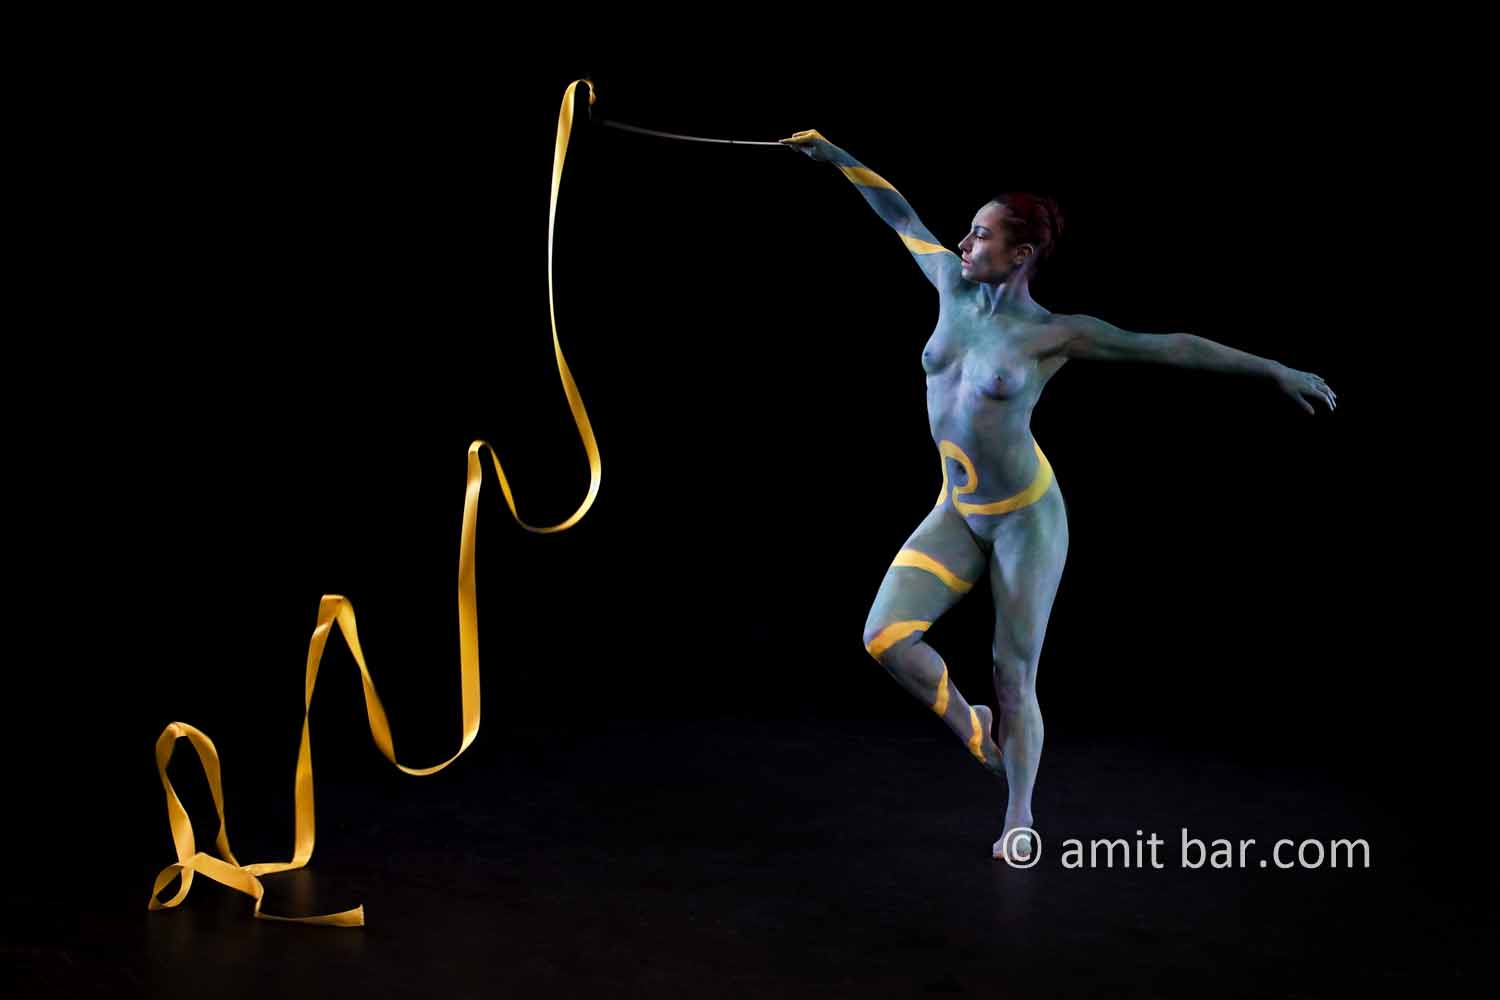 Ribbon dance I: Body-painted dancer with yellow ribbon